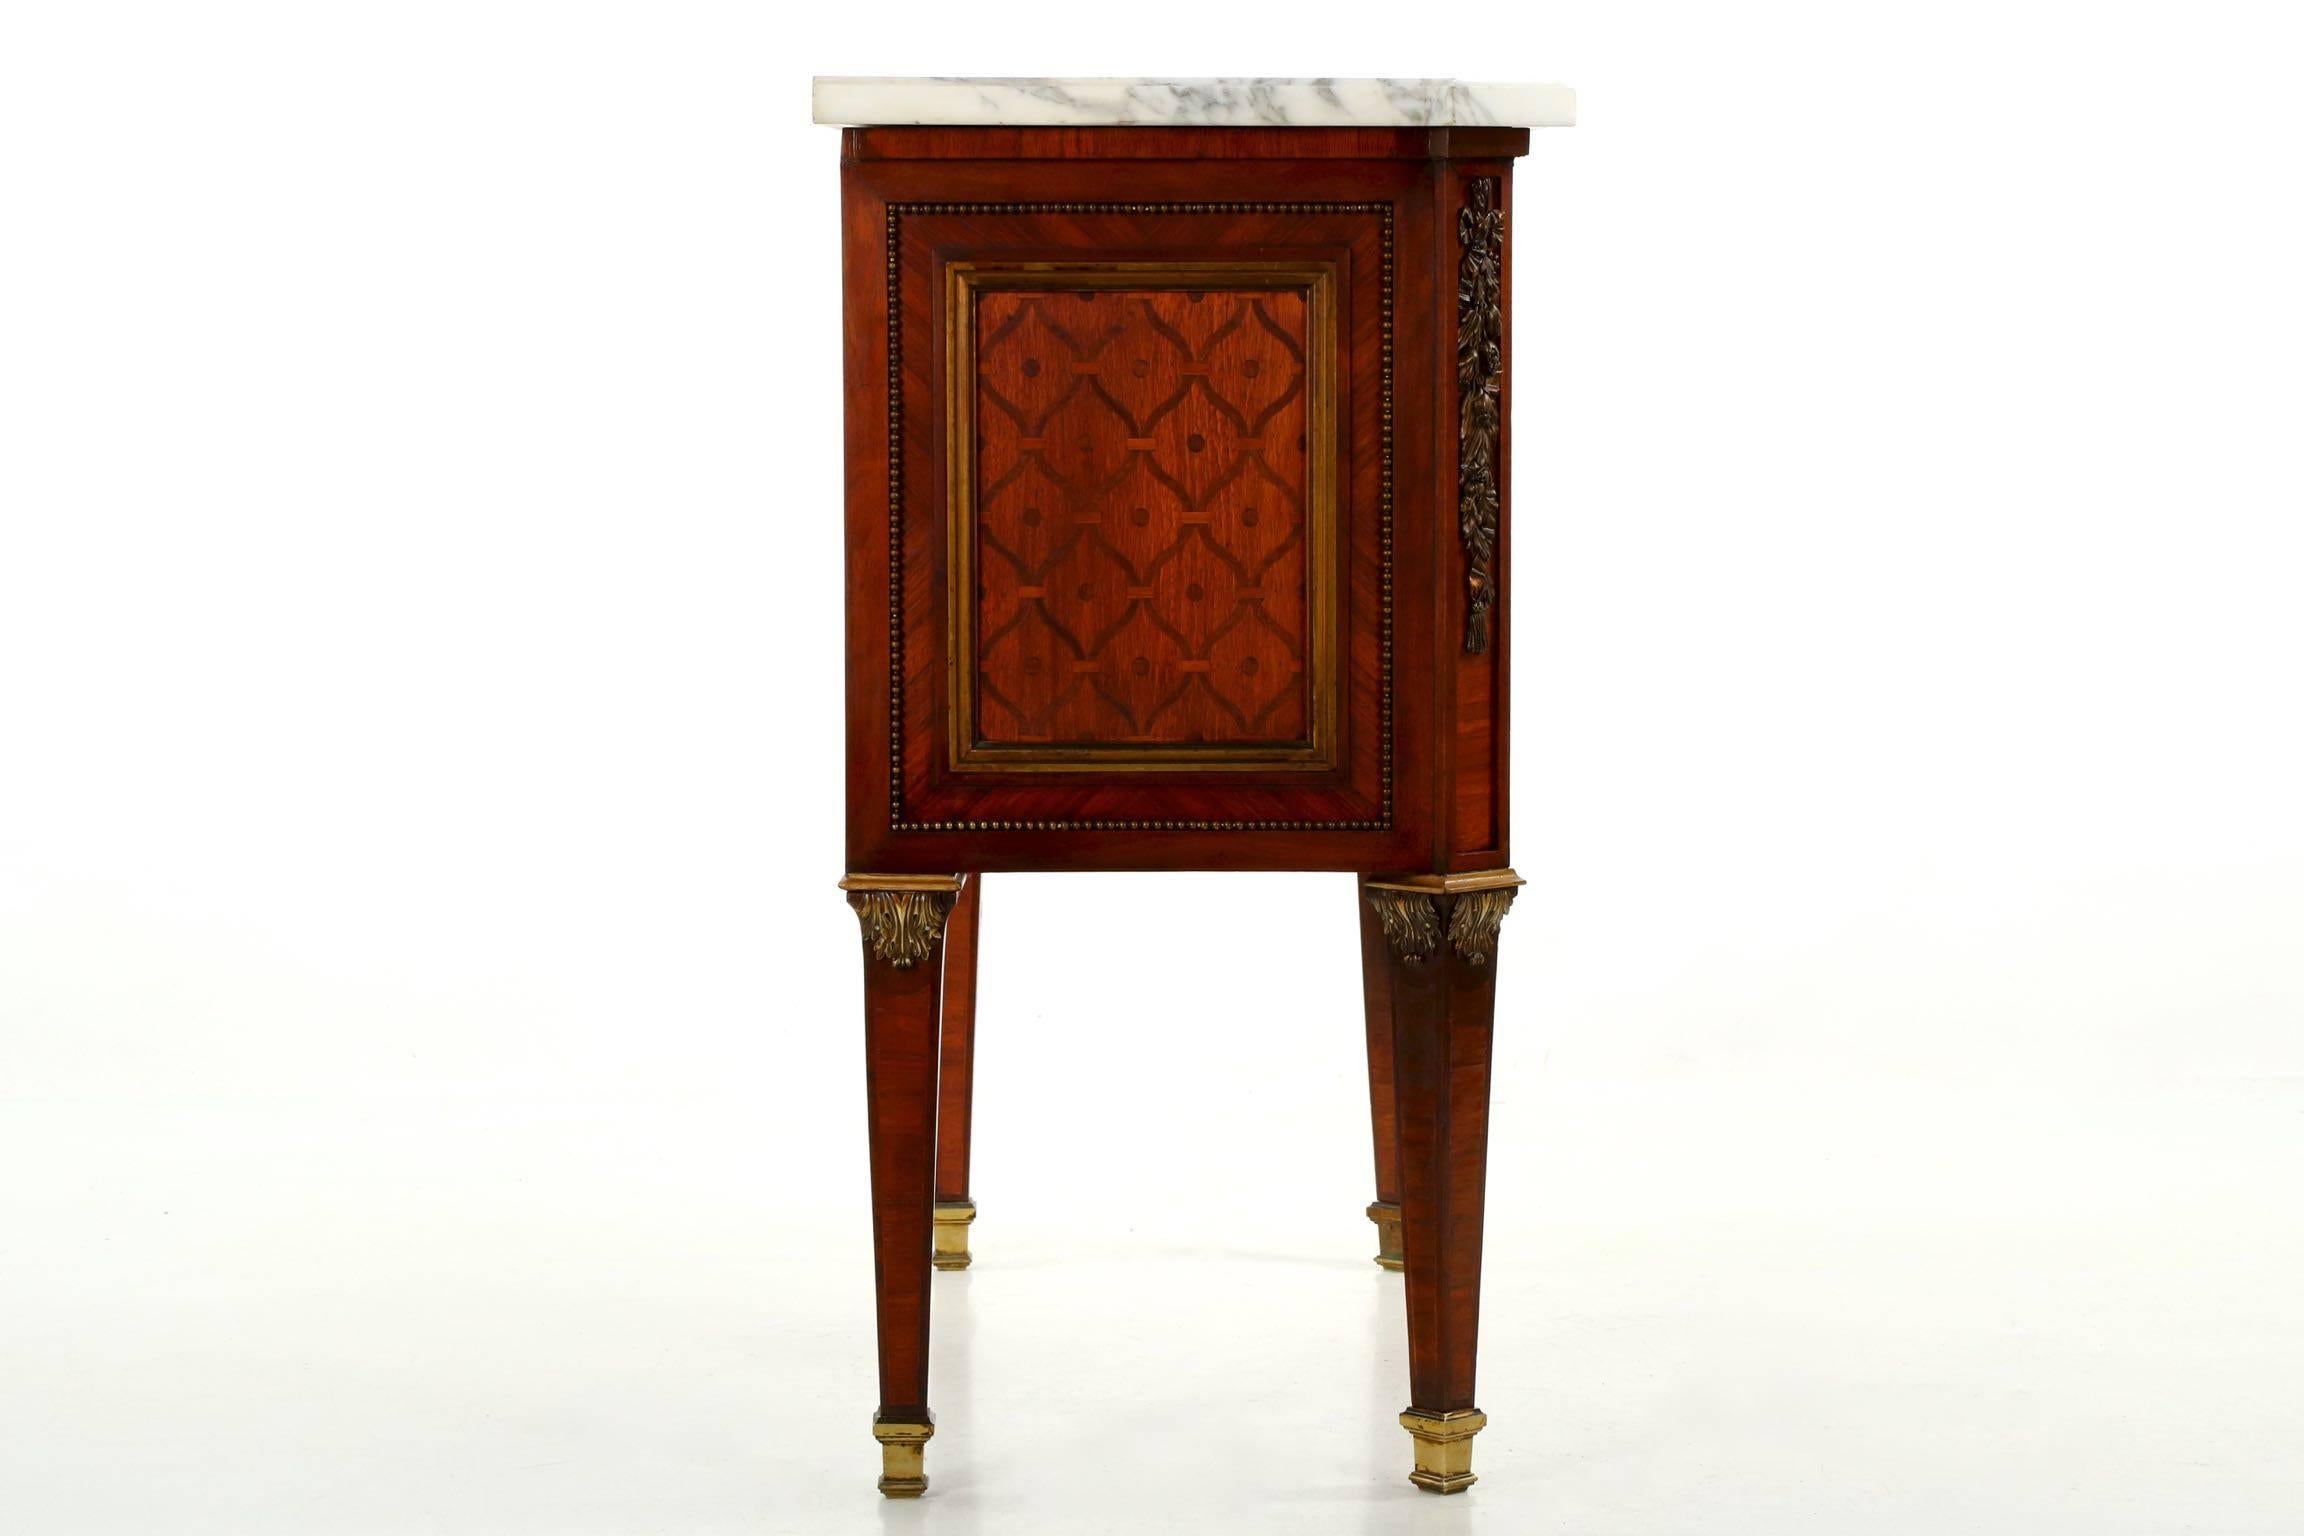 Belle Époque French Neoclassical Bronze and Marble Parquetry Inlaid Commode, circa 1880